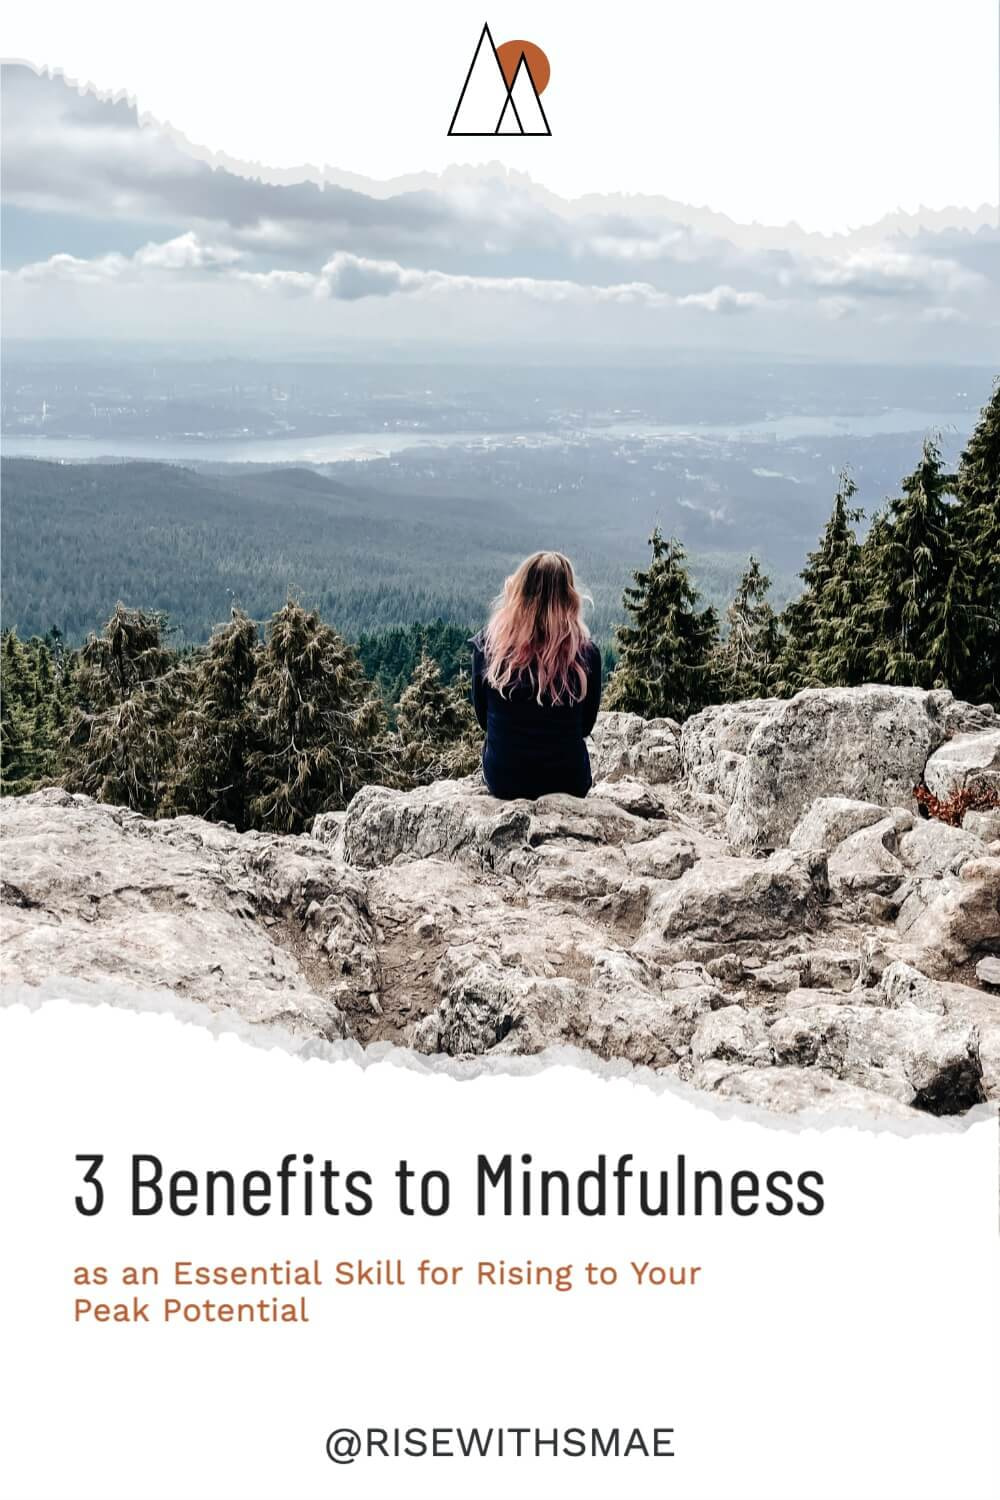 3 Benefits to Mindfulness as an Essential Skill for Rising to Your Peak Potential